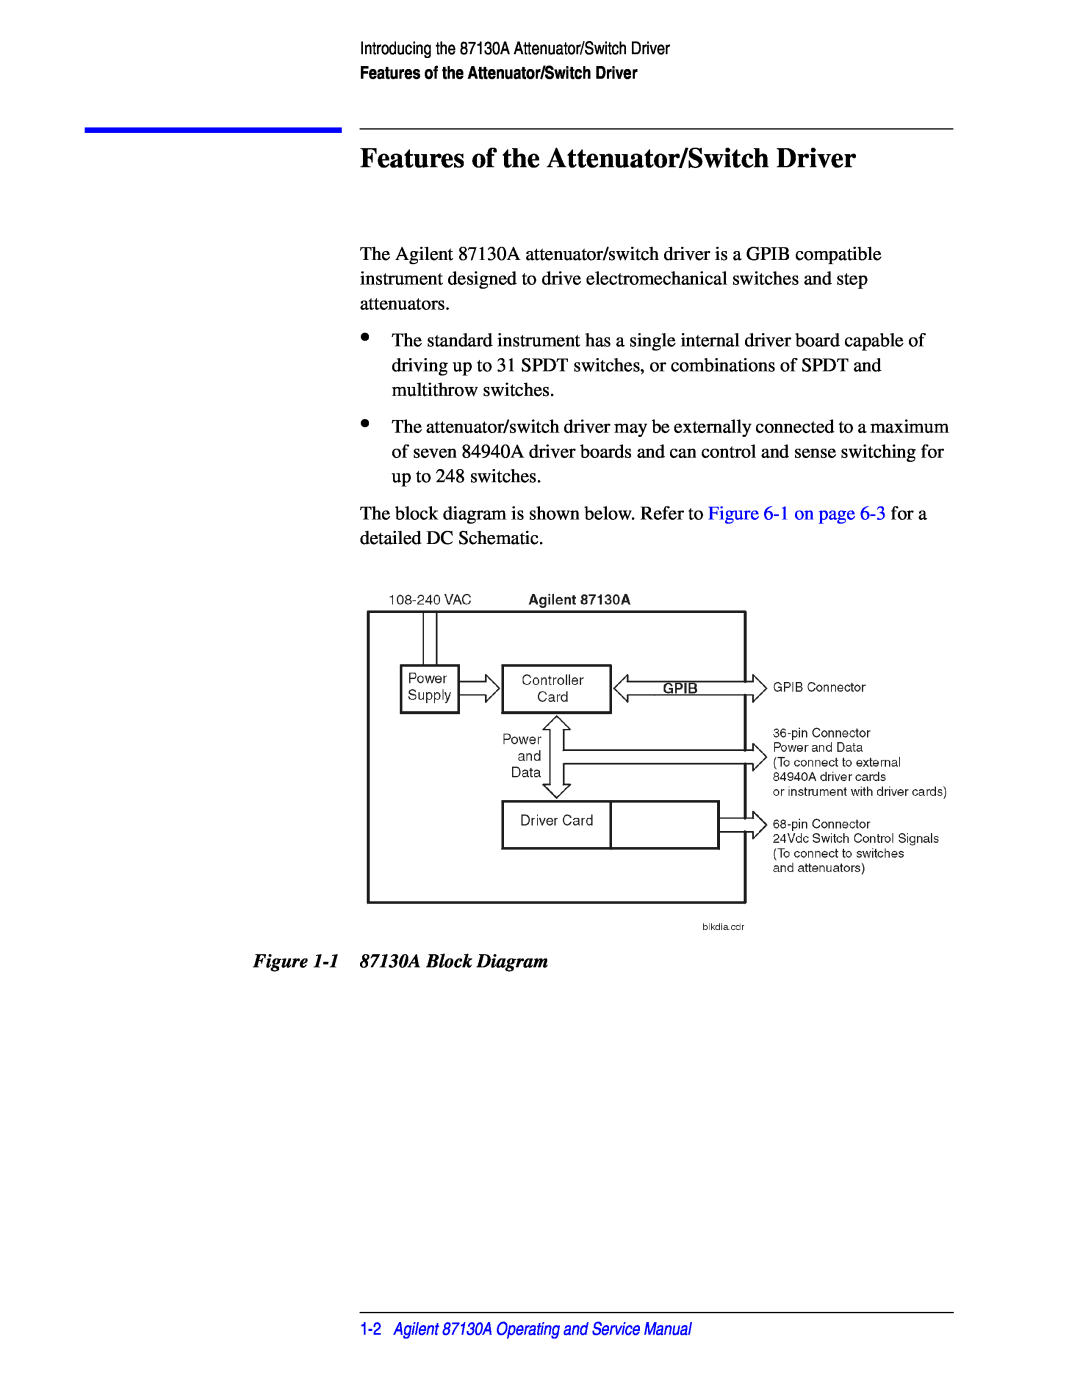 Agilent Technologies manual Features of the Attenuator/Switch Driver, 1 87130A Block Diagram 